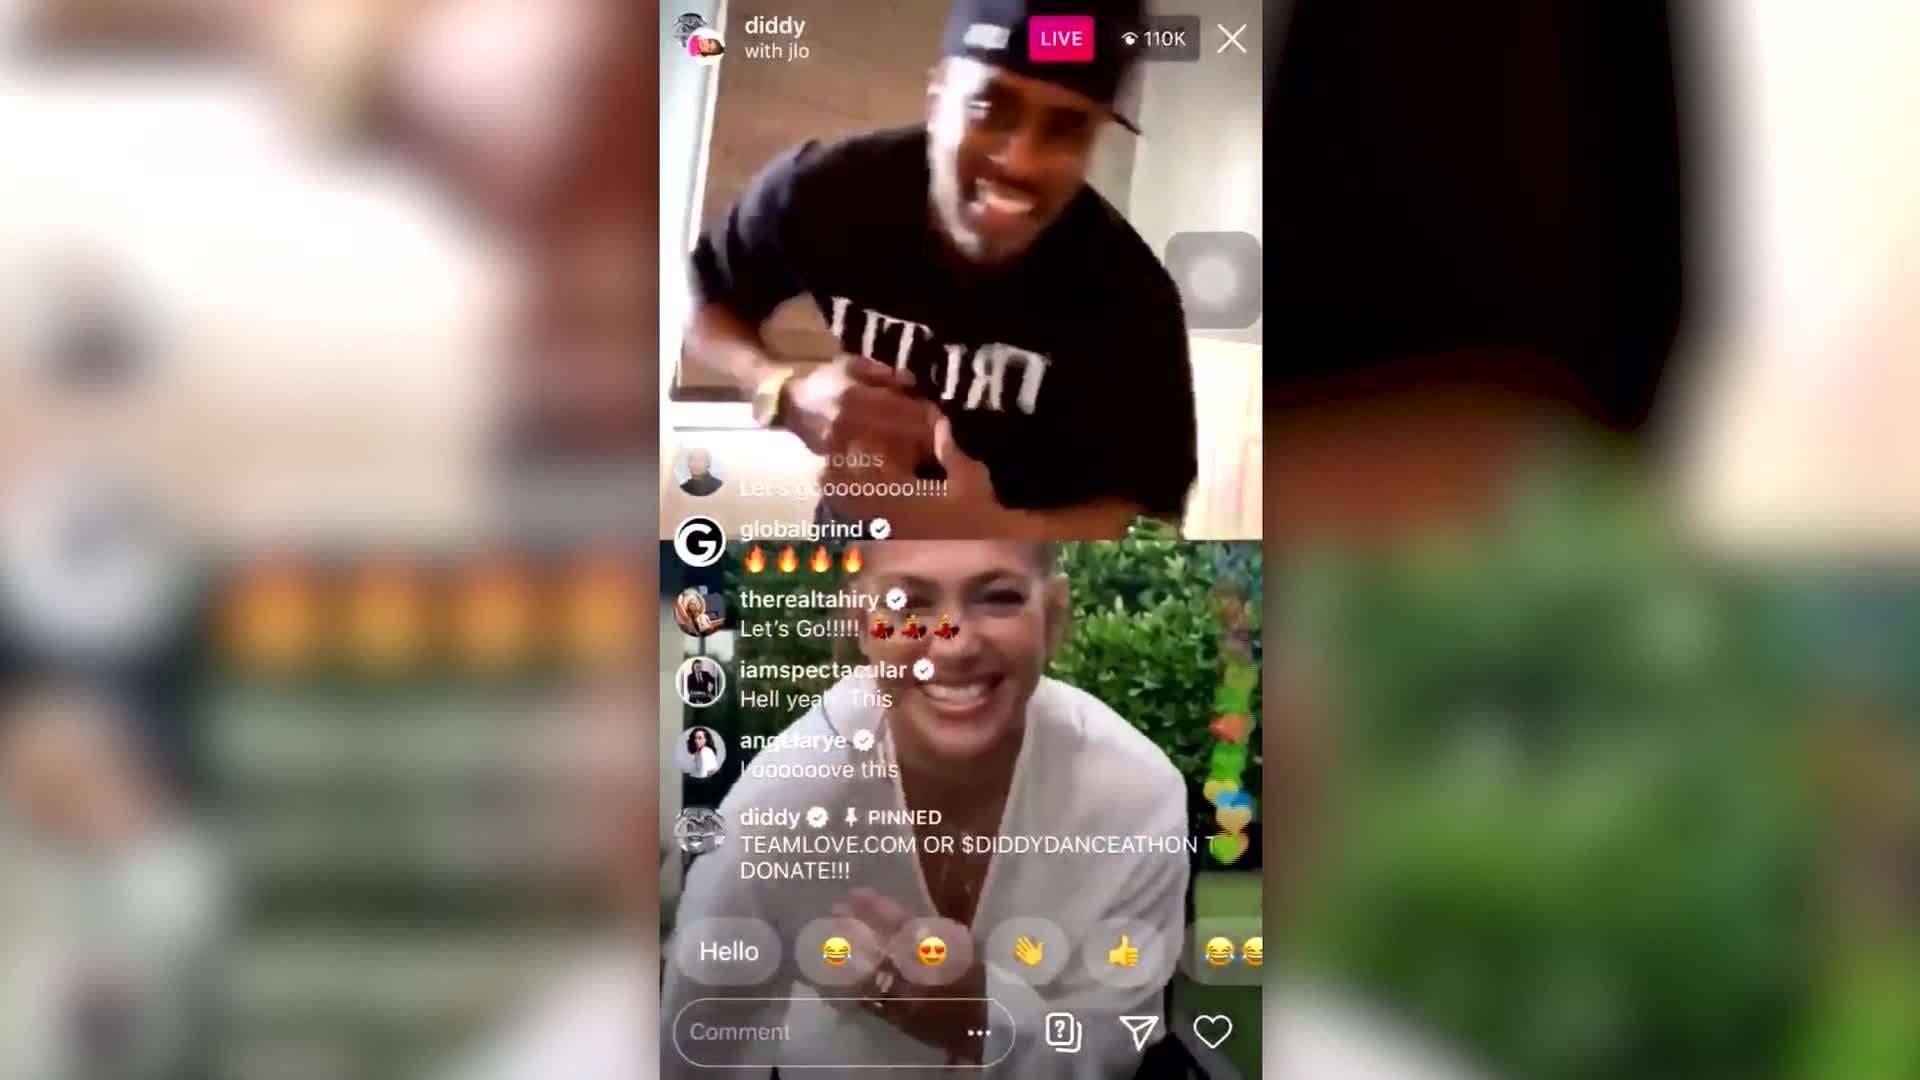 J Lo And Diddy Reunite For Dance On Instagram Live Cnn Video